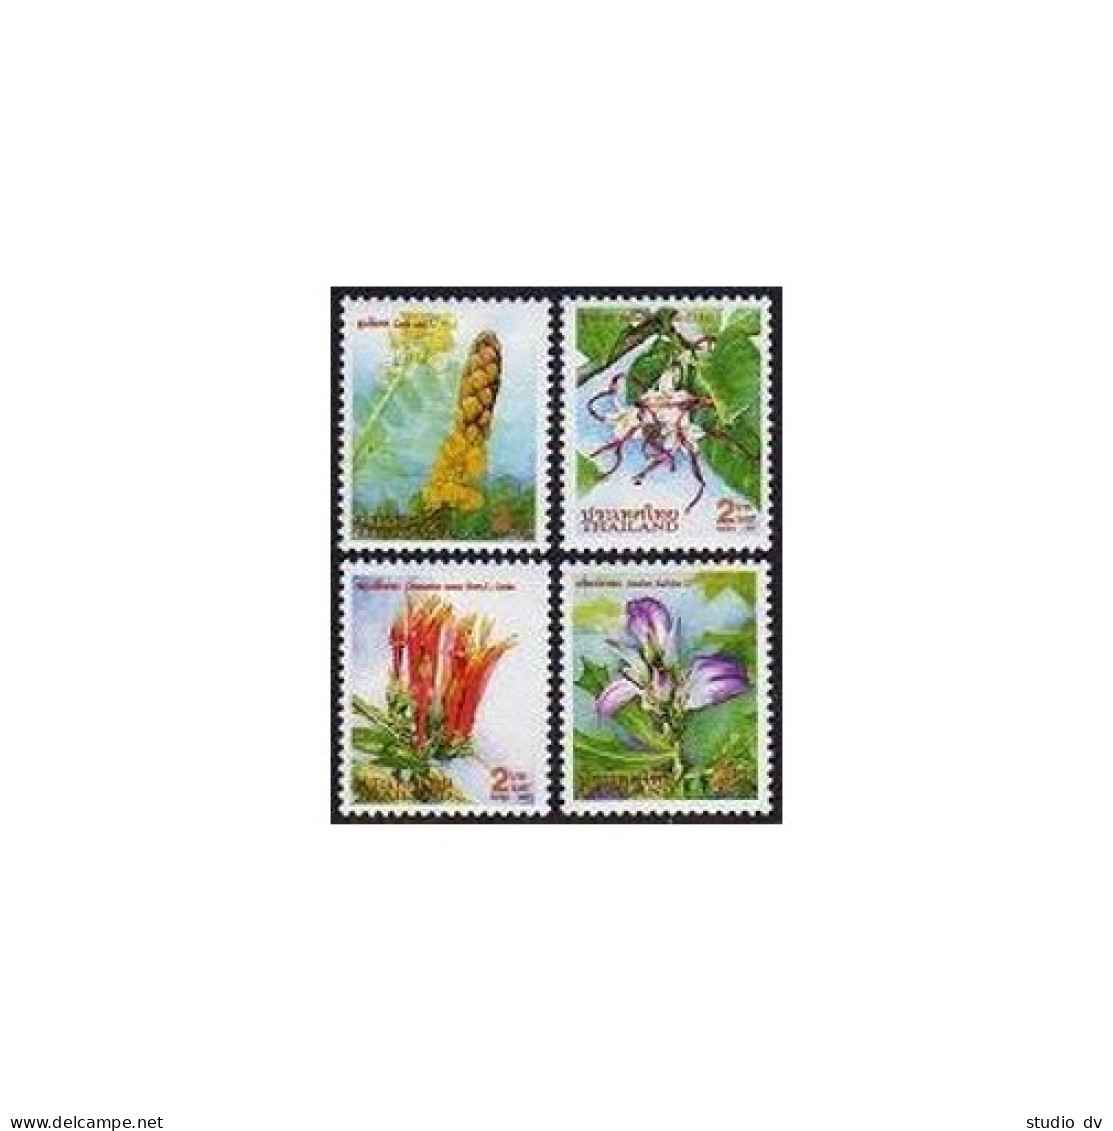 Thailand 1777-1780,1780a,1780b Sheets,MNH. New Year 1998,Flowers.1977. - Tailandia